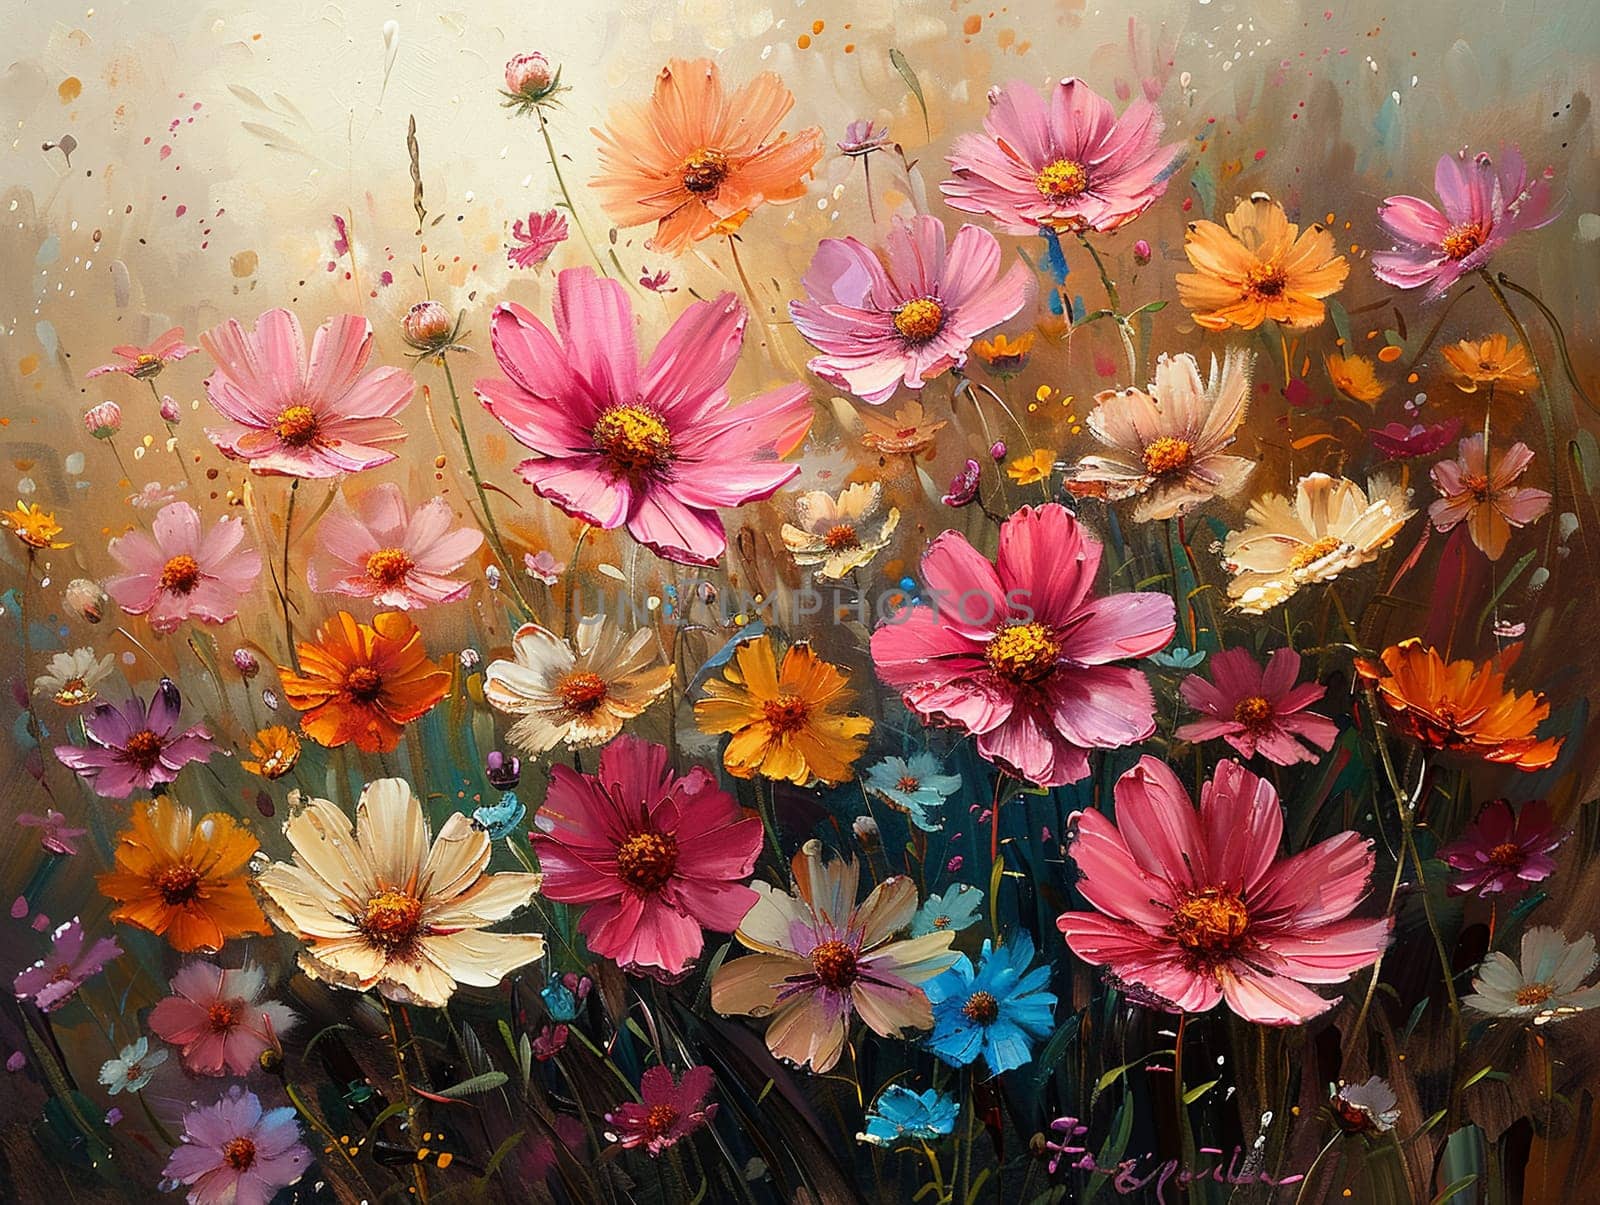 Flower garden at sunrise, beautiful royalty-free painting in oils, capturing the soft light and dew on petals.